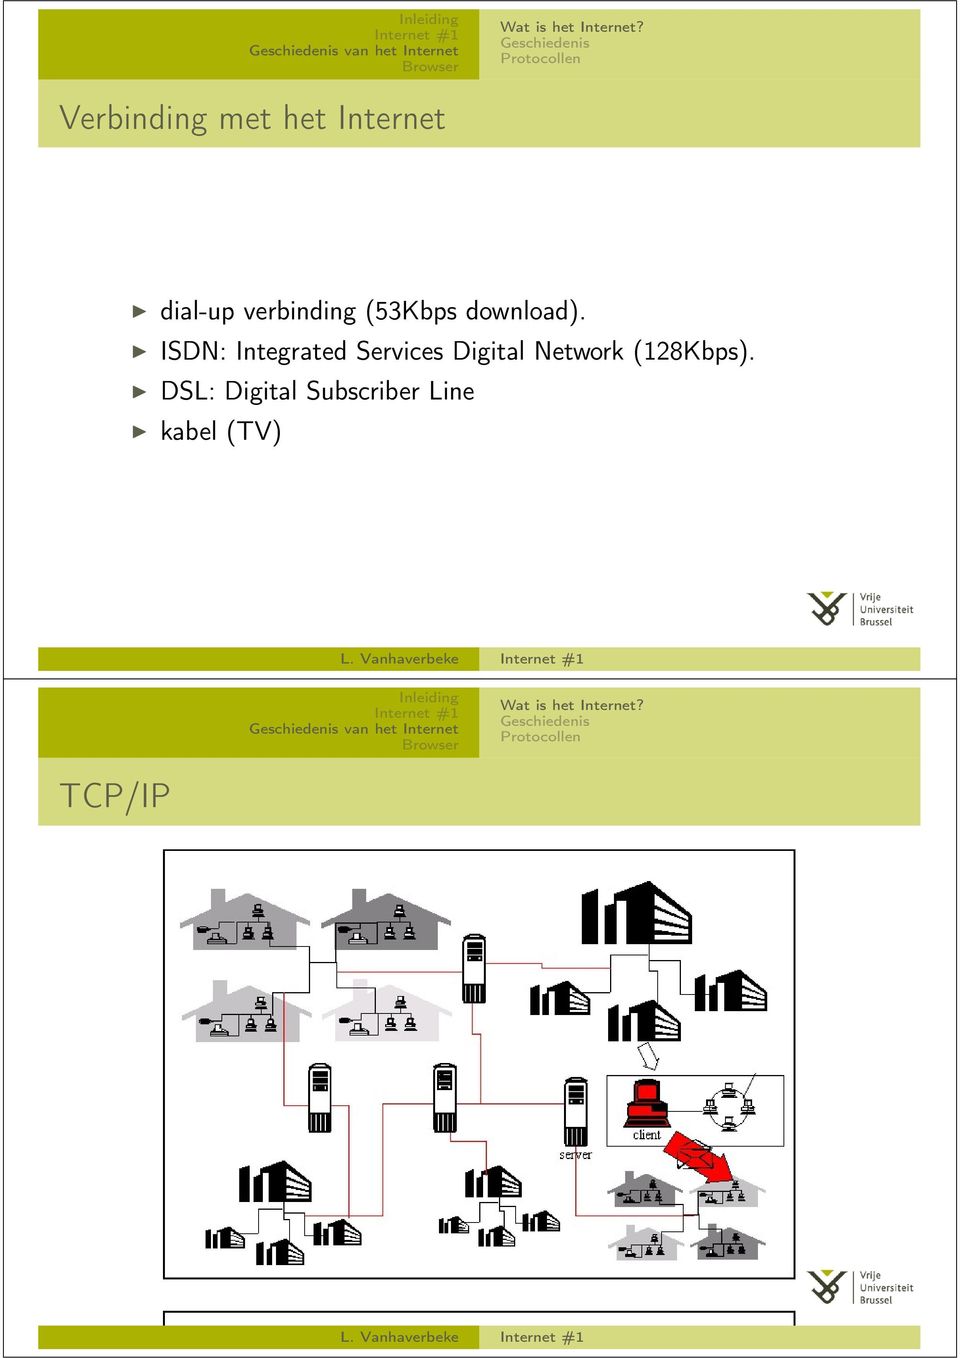 ISDN: Integrated Services Digital Network